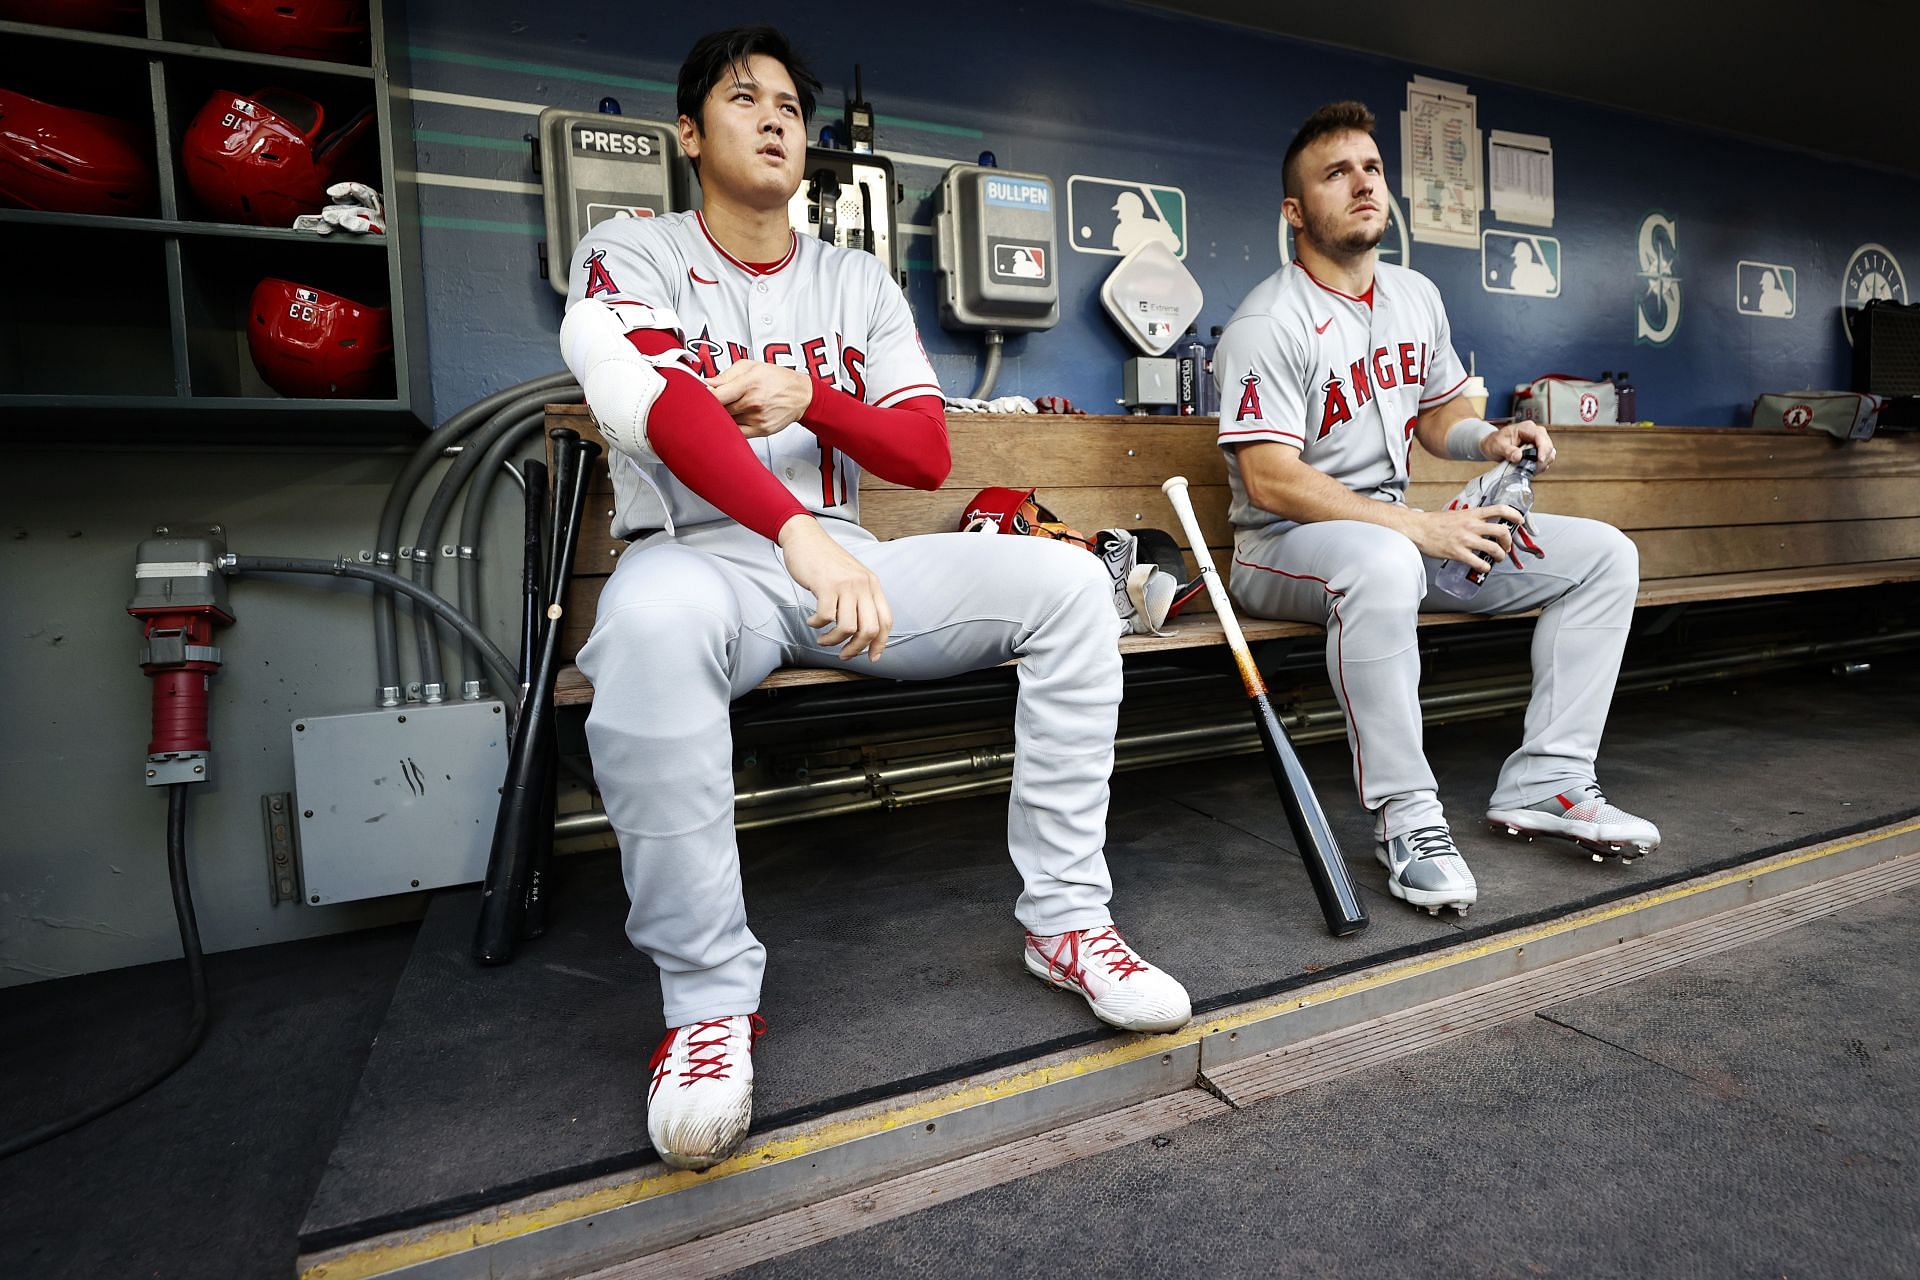 Watch: Los Angeles Angels superstars Mike Trout and Shohei Ohtani crush  back-to-back dingers against All-Star pitcher